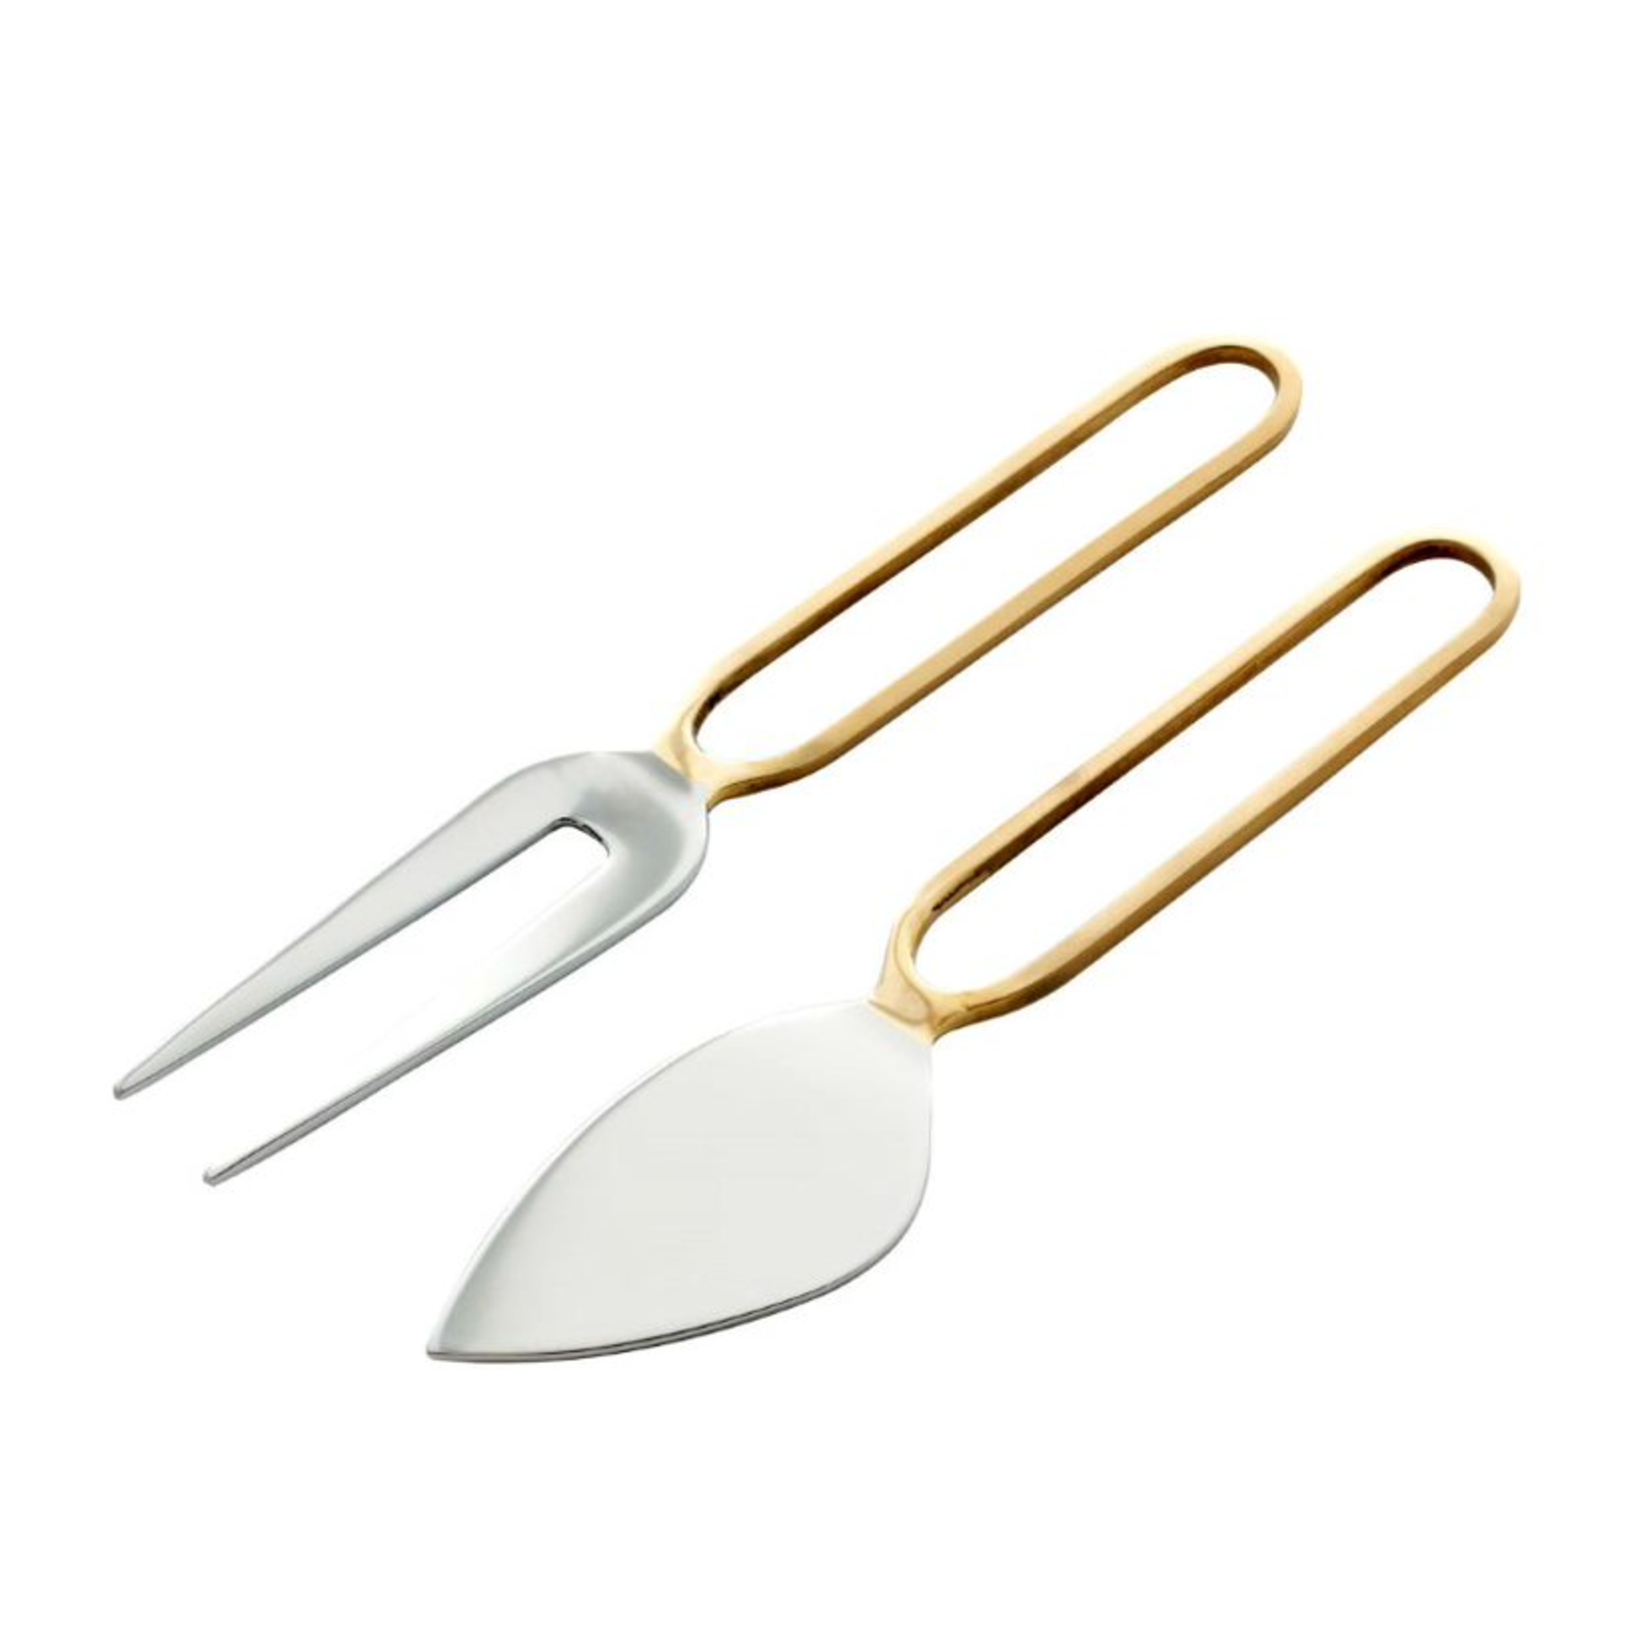 Texxture Brompton Cheese Knives Set of 2